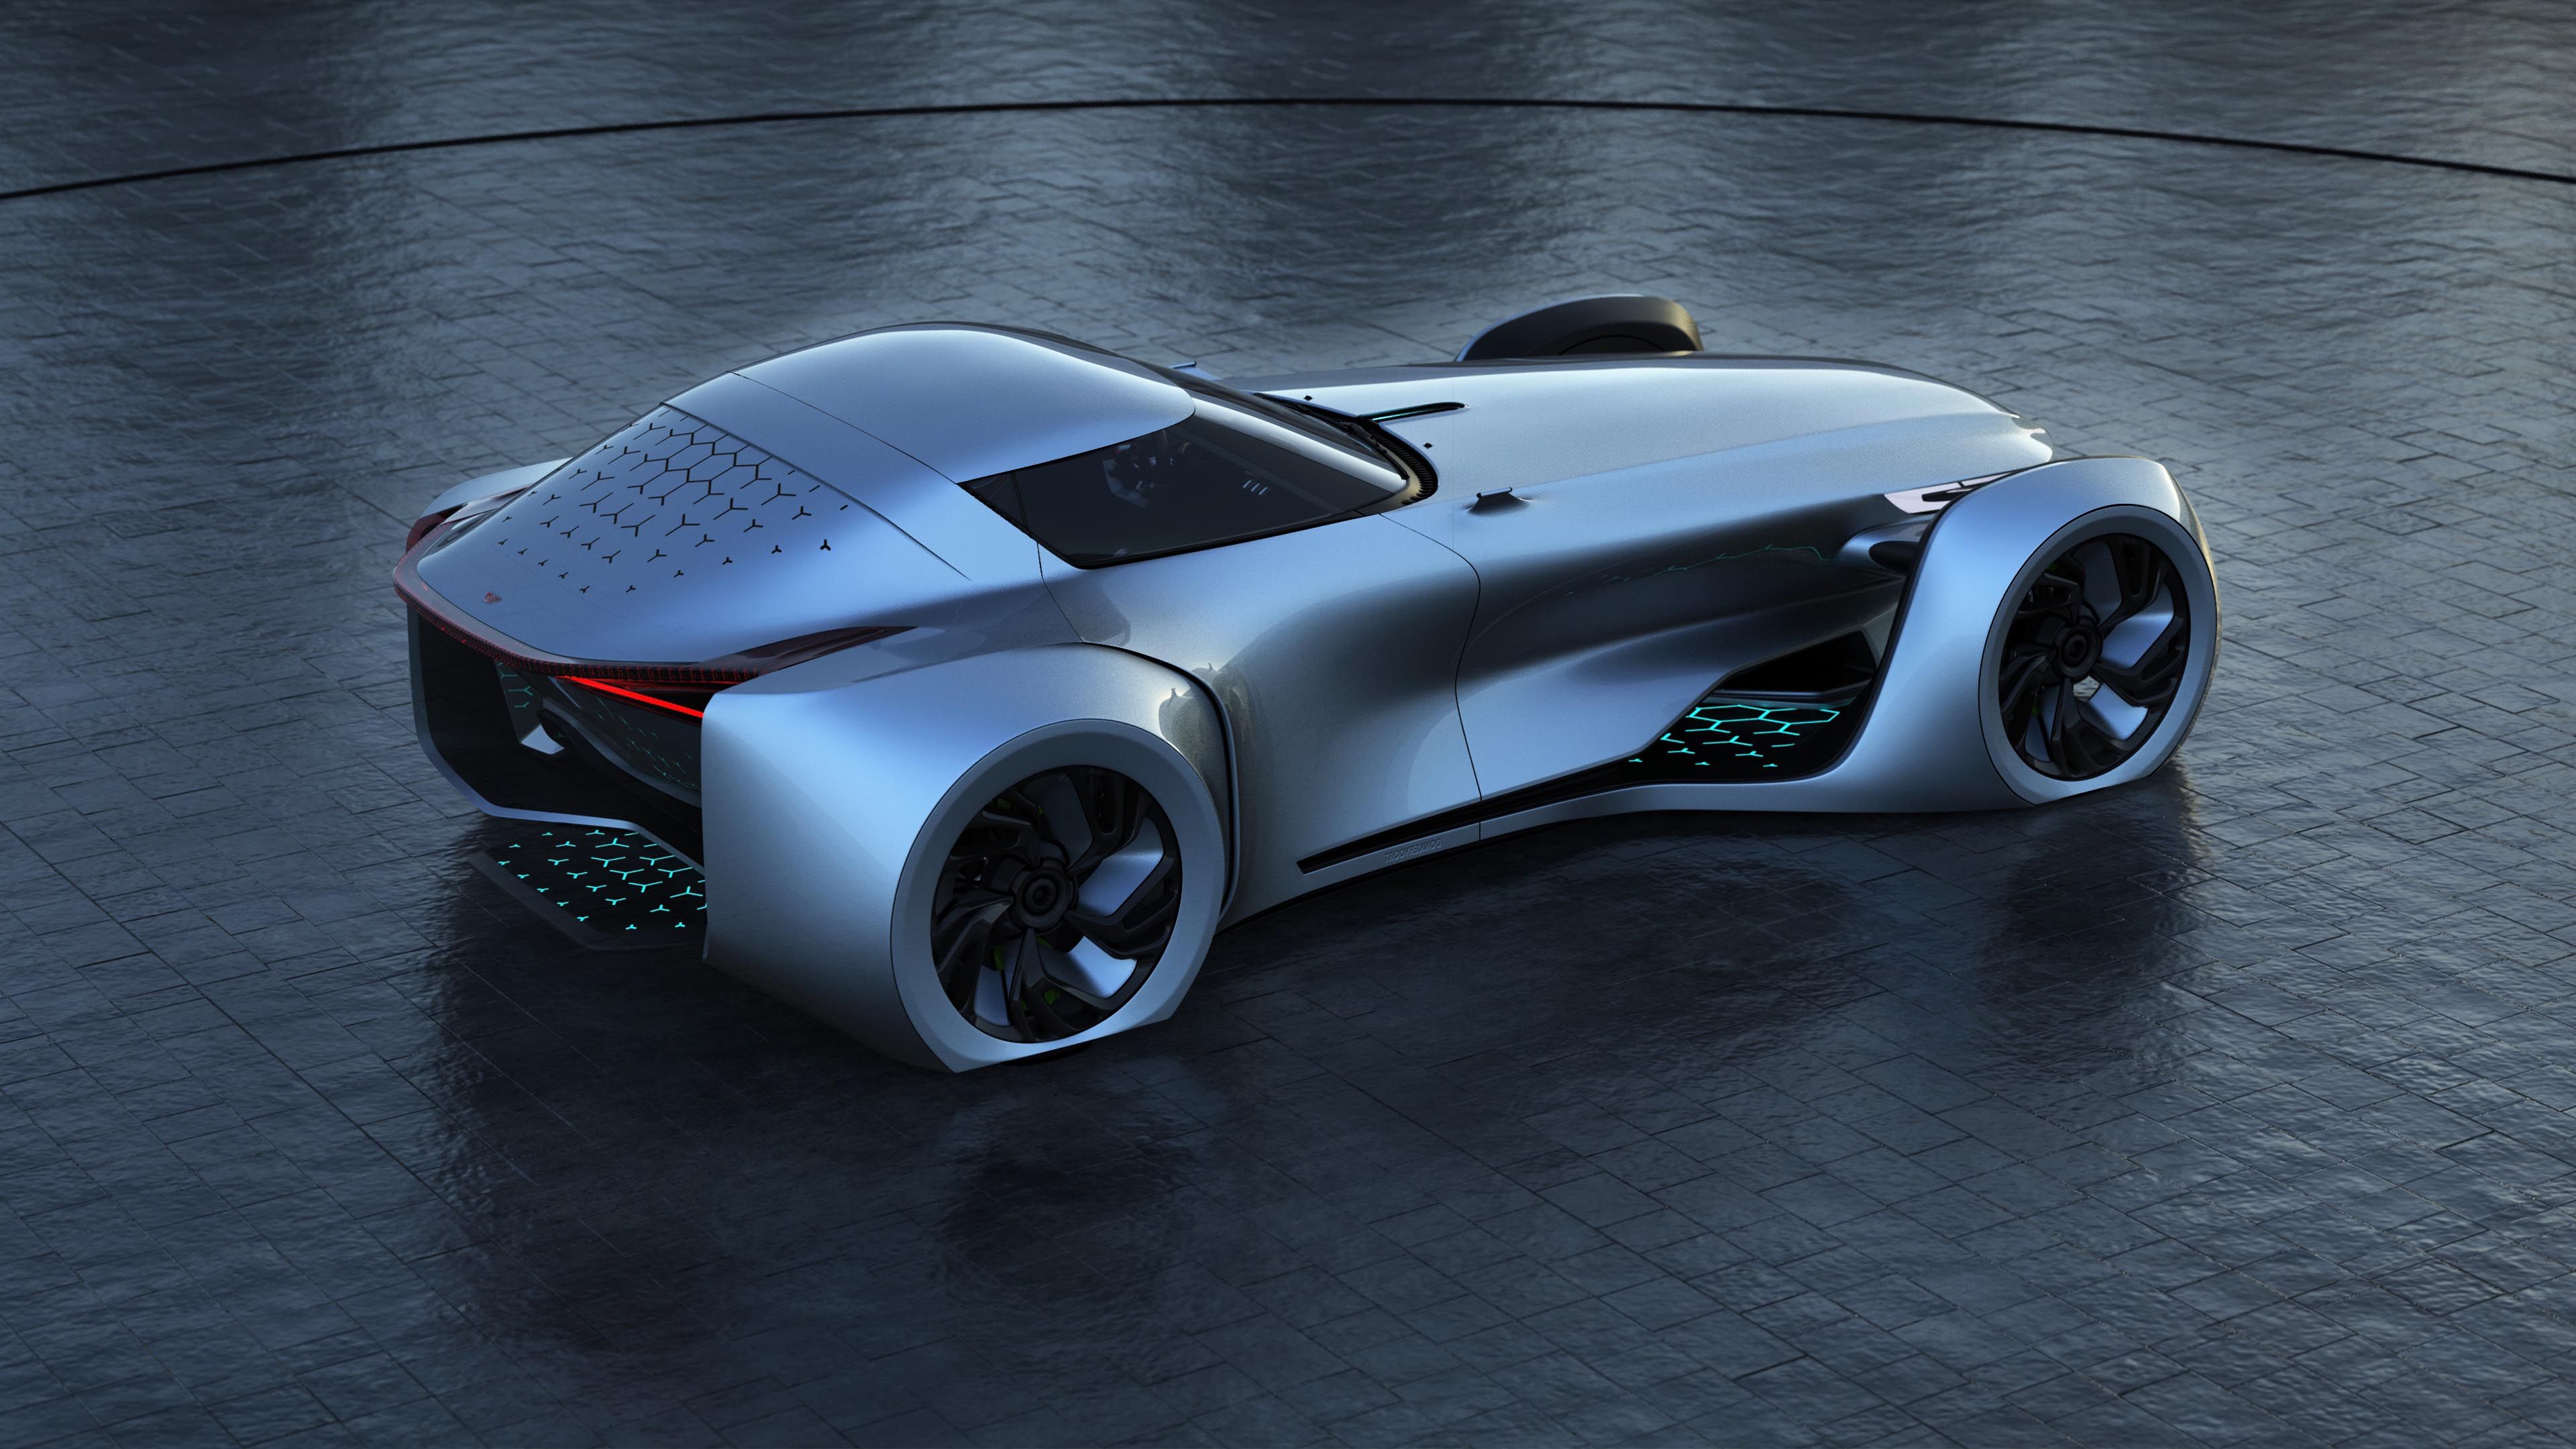 The new Donkervoort EVx Vision designed by One One Lab